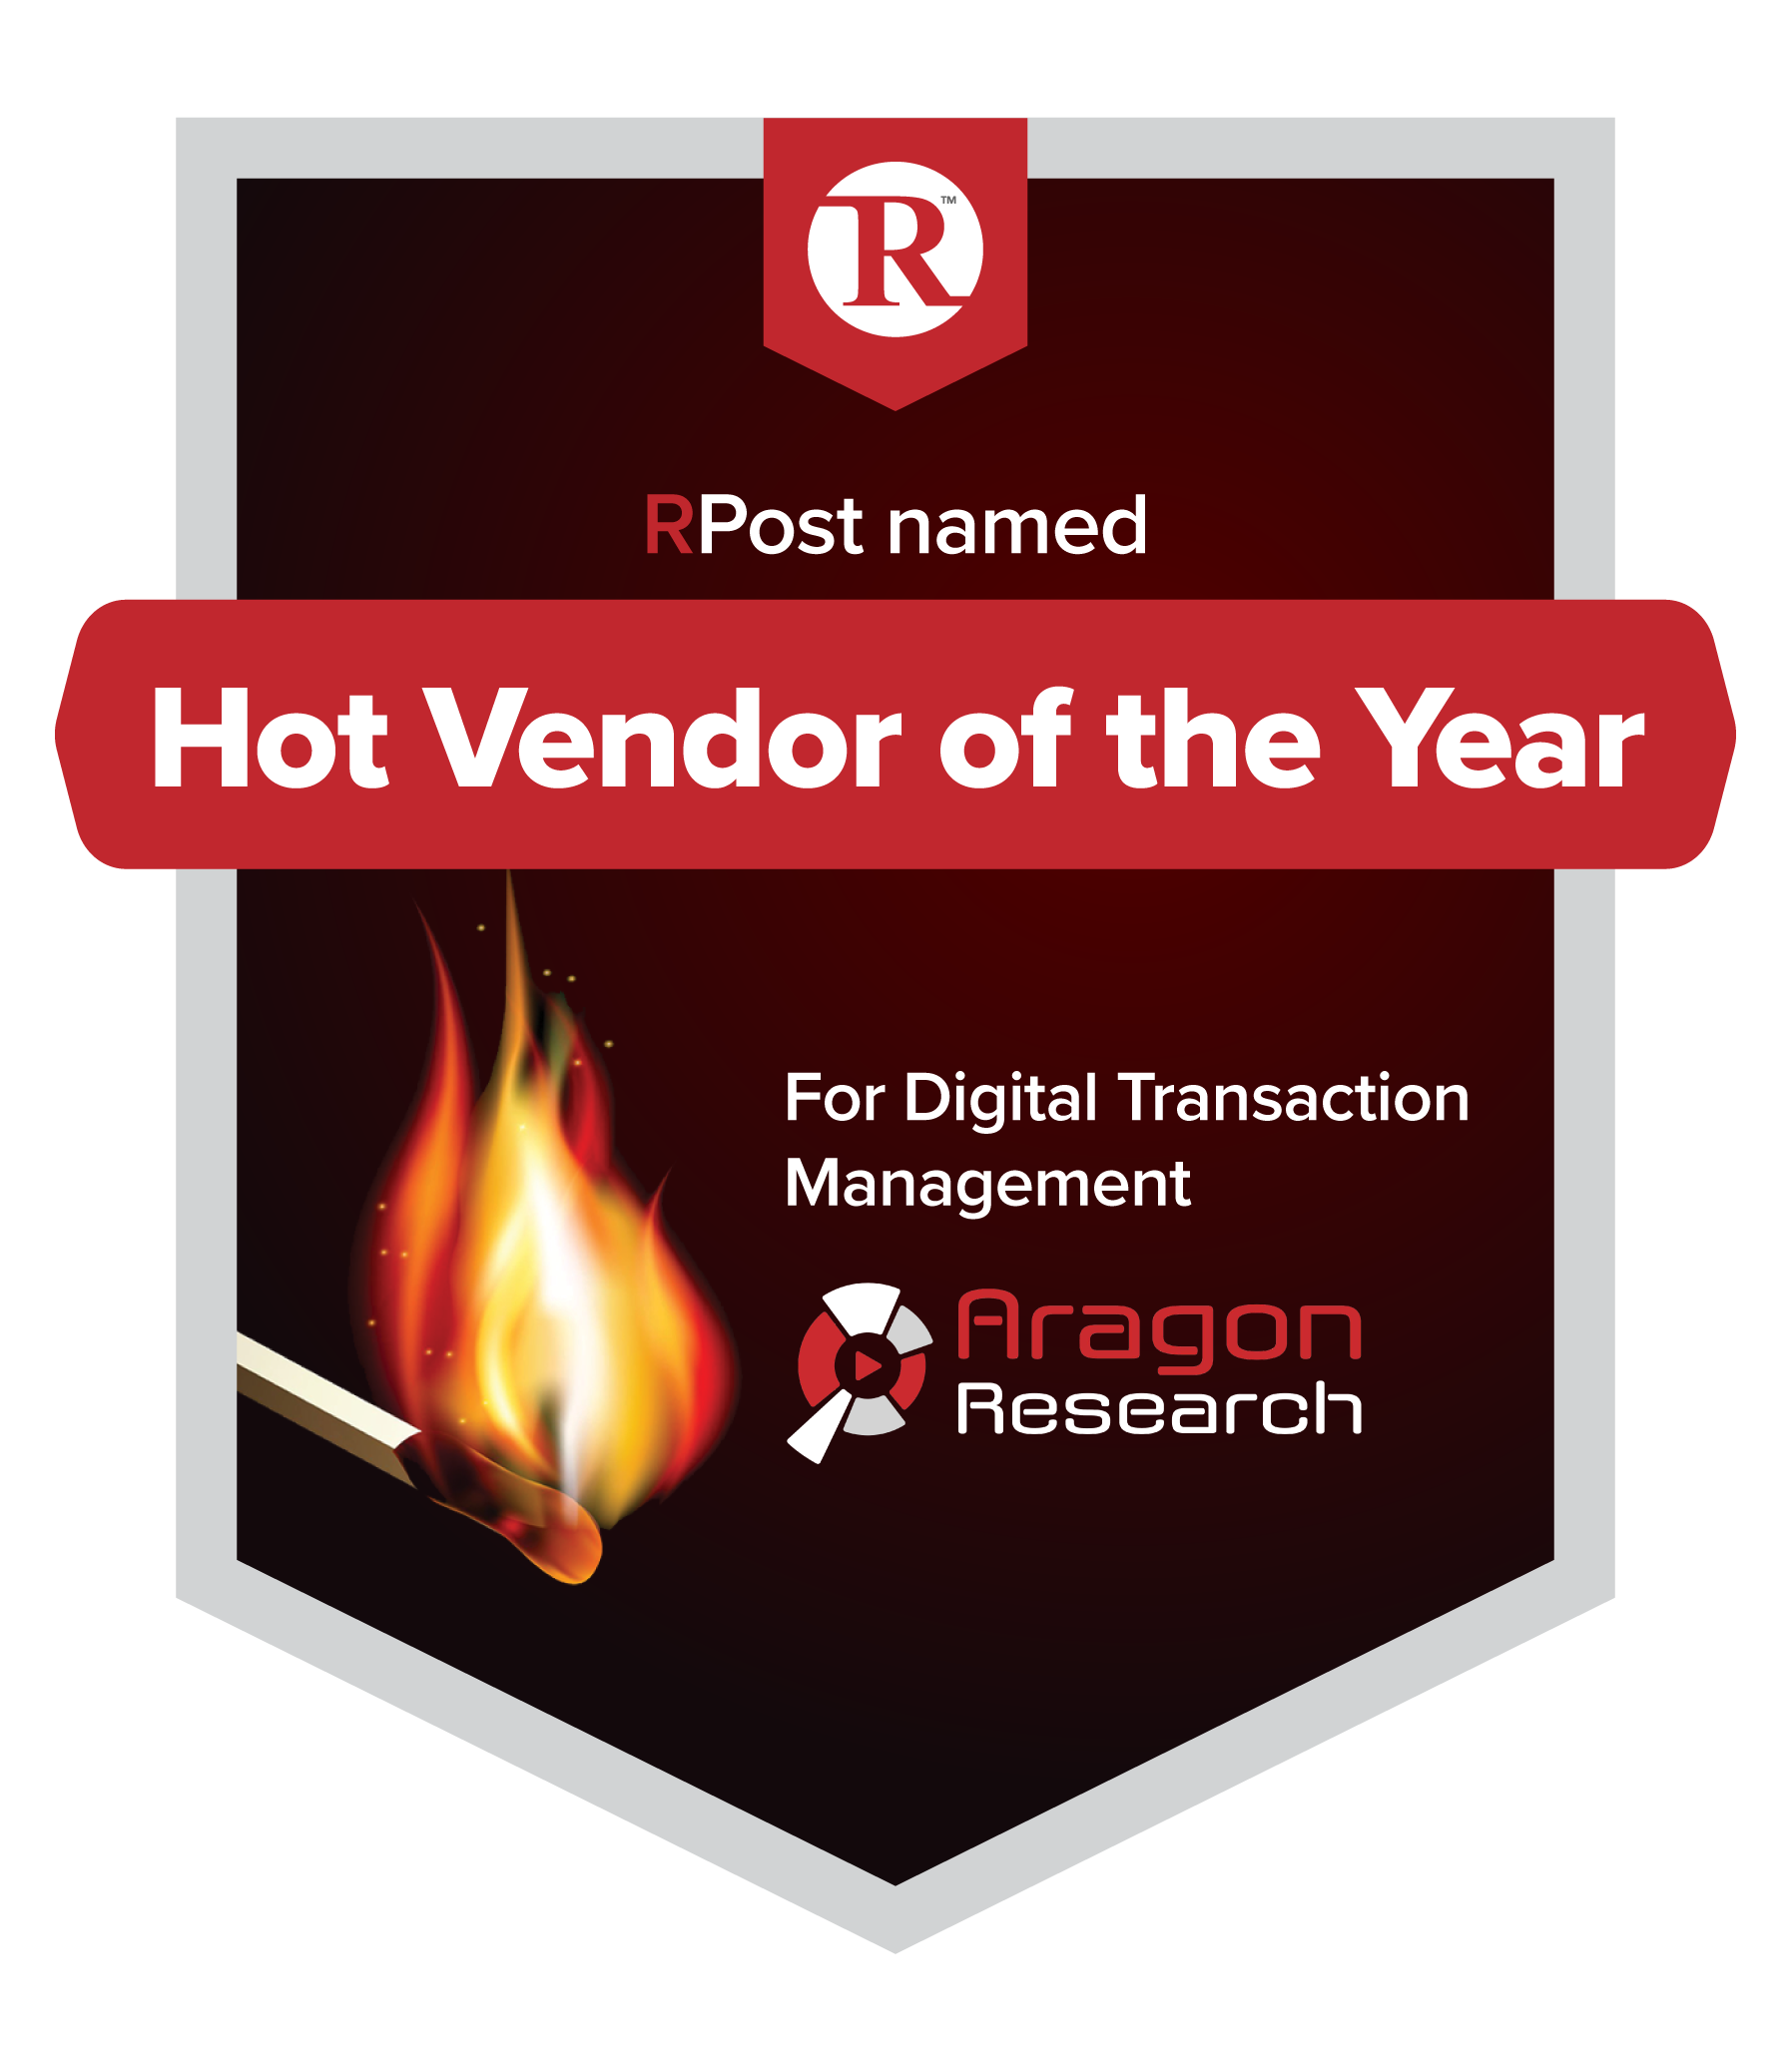 Aragon Research Recognizes RPost as “Hot Vendor” and “Most Innovative” in its Digital Transaction Management Reports